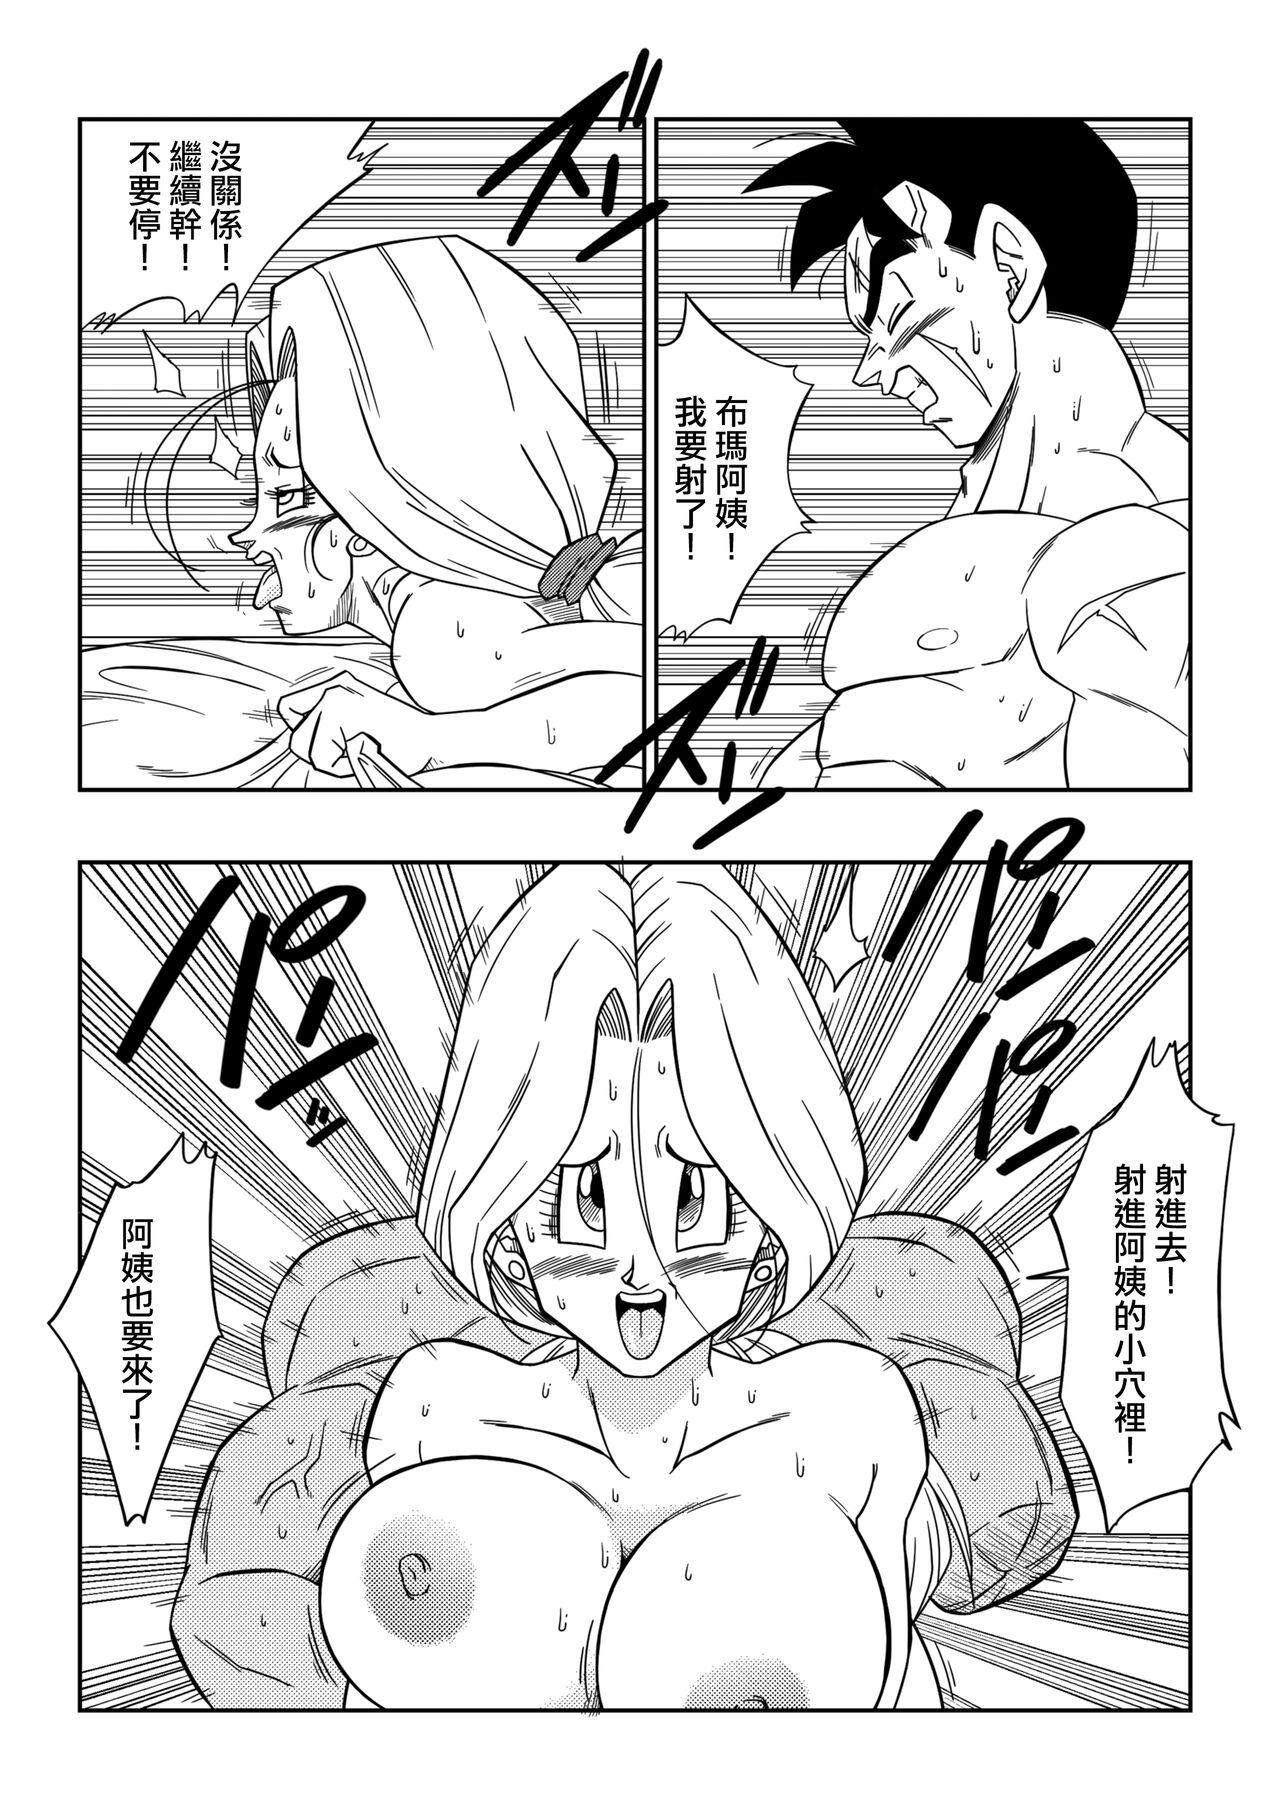 Amateur Cum Lost of sex in this Future! - BULMA and GOHAN - Dragon ball z Cornudo - Page 8